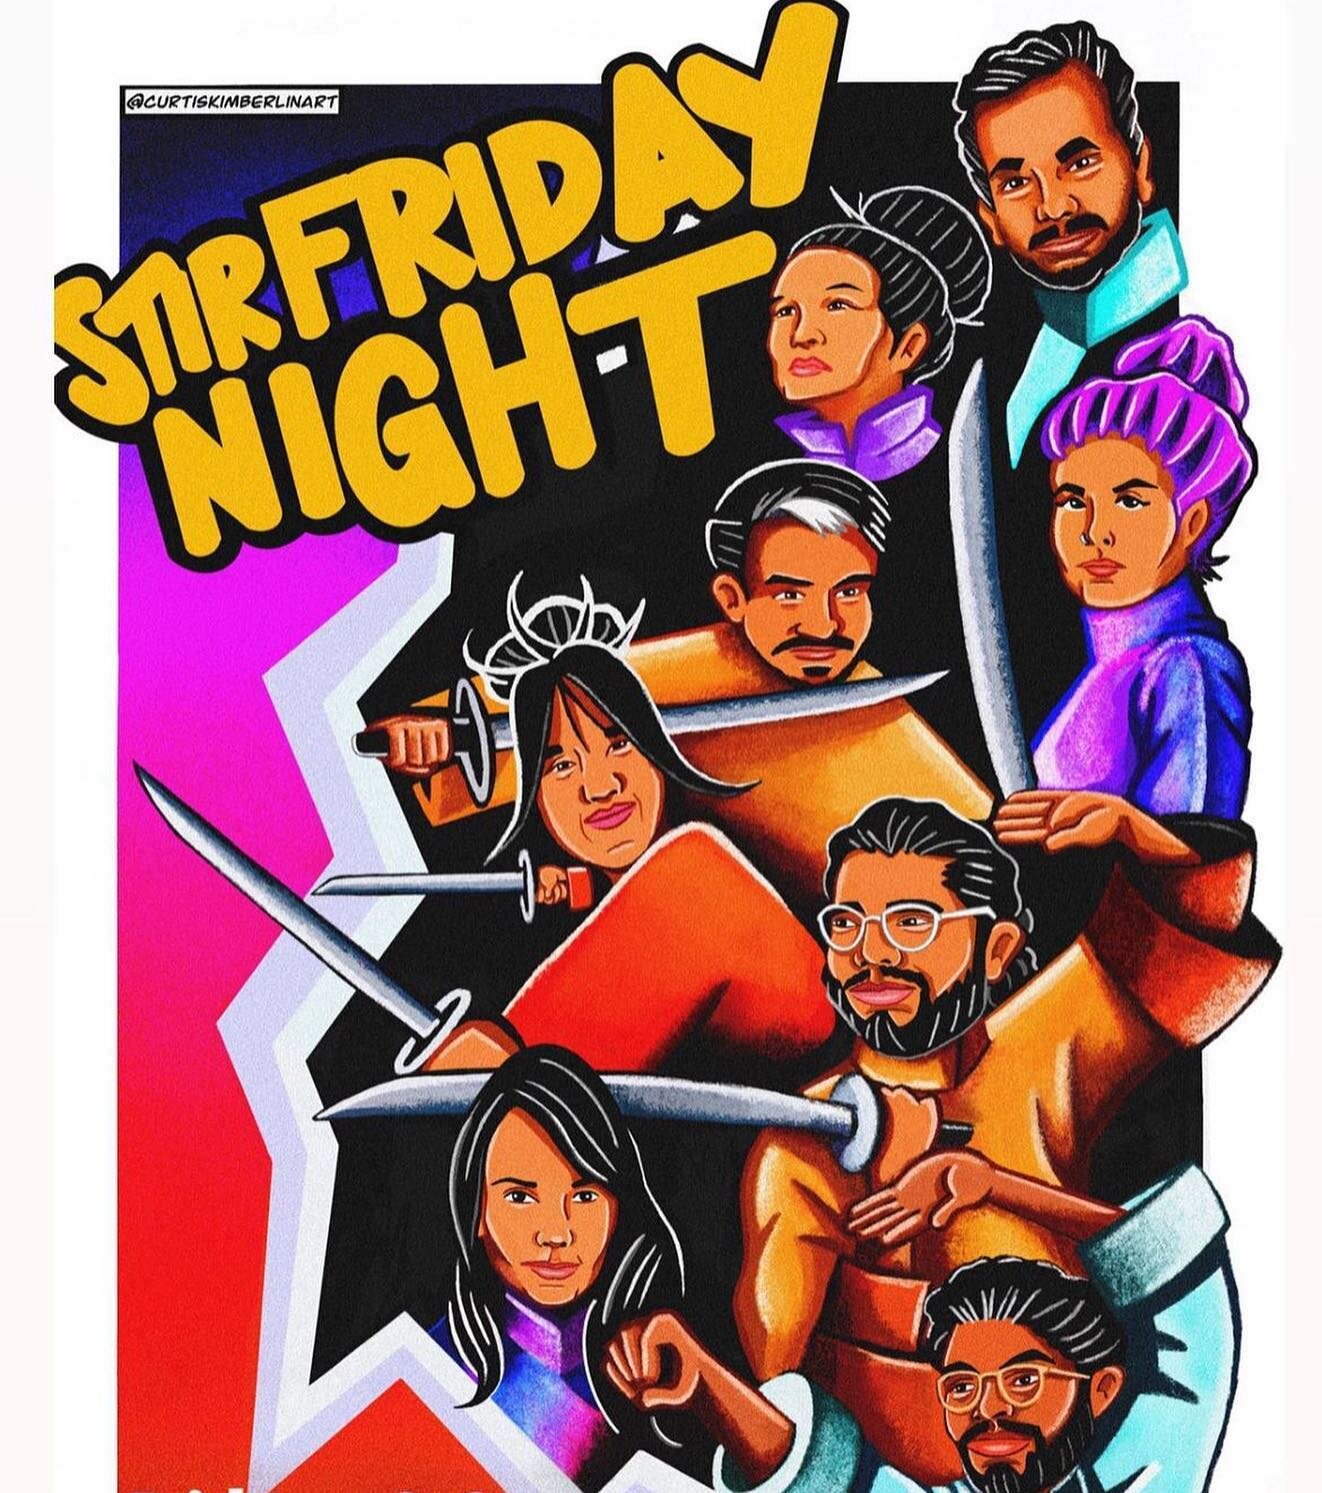 AAPI month might be over but we&rsquo;re still Asian! Improv comedy every Friday at 10! We&rsquo;ll be at @iochicago. Come through to see the reason why Stir Friday Night has been running for 27 years!